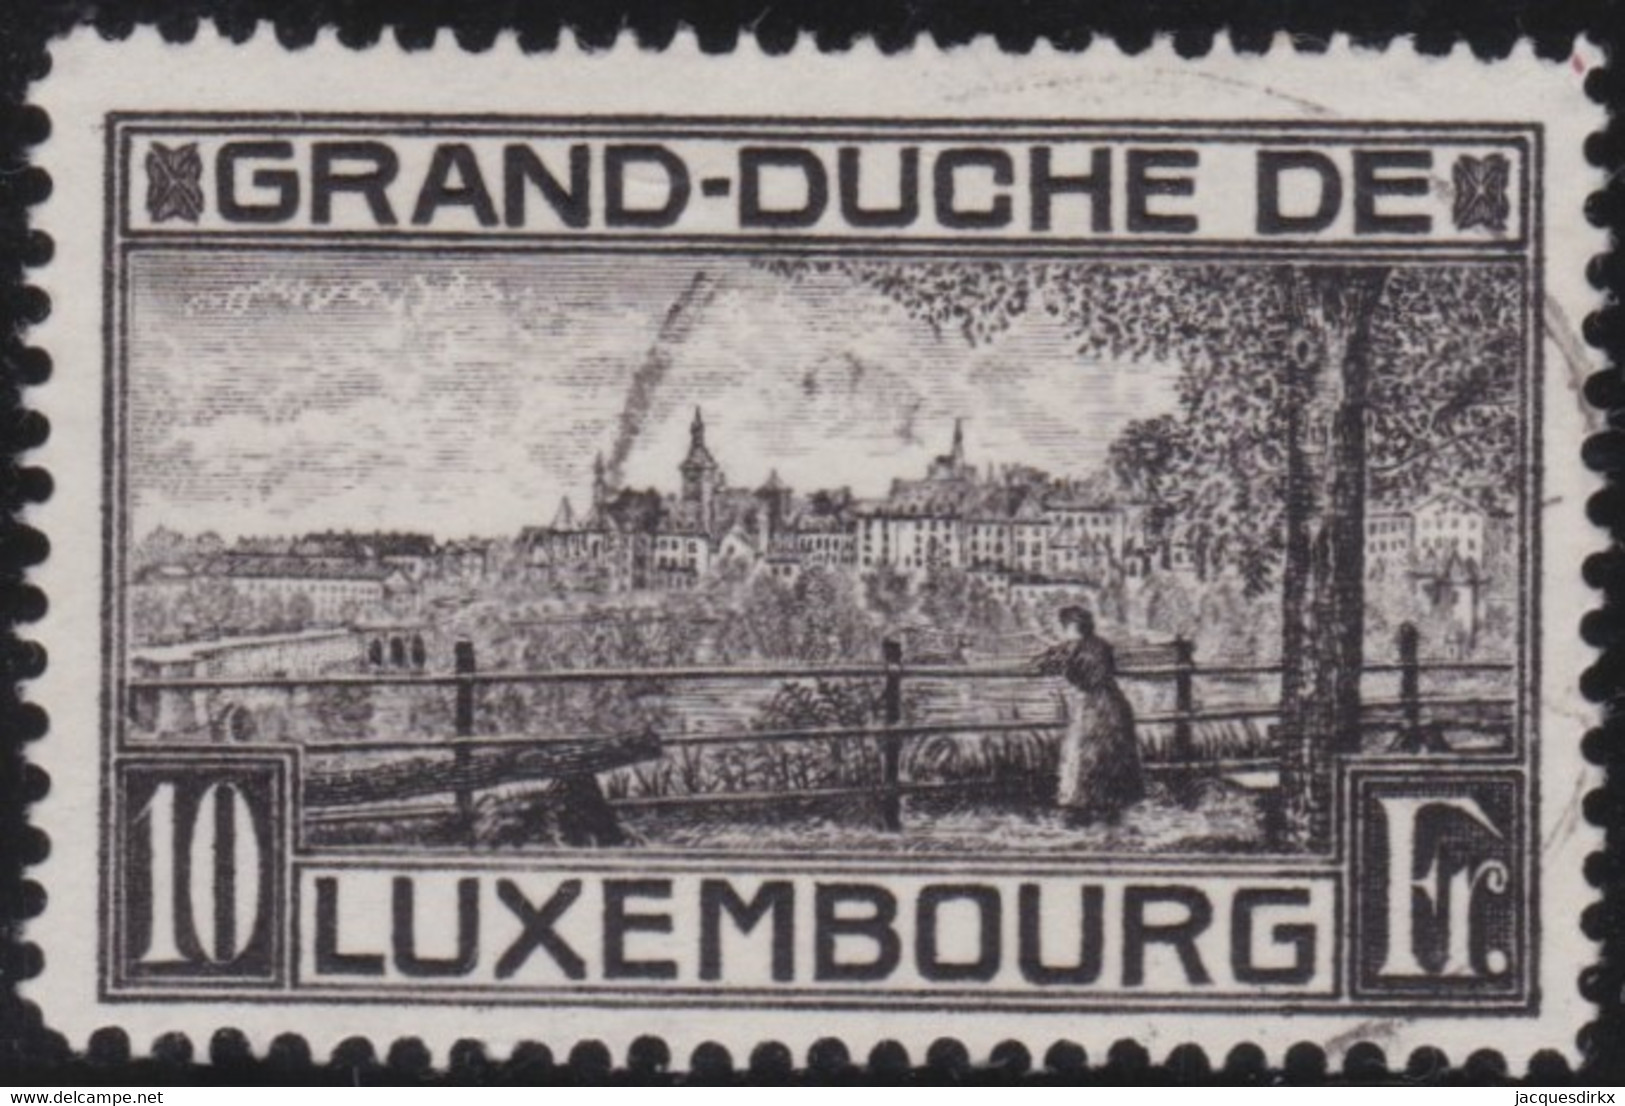 Luxembourg   .  Y&T    .  141  . Perf.  12½      .    O     .   Oblitéré   .   /   .    Gestempelt - Used Stamps